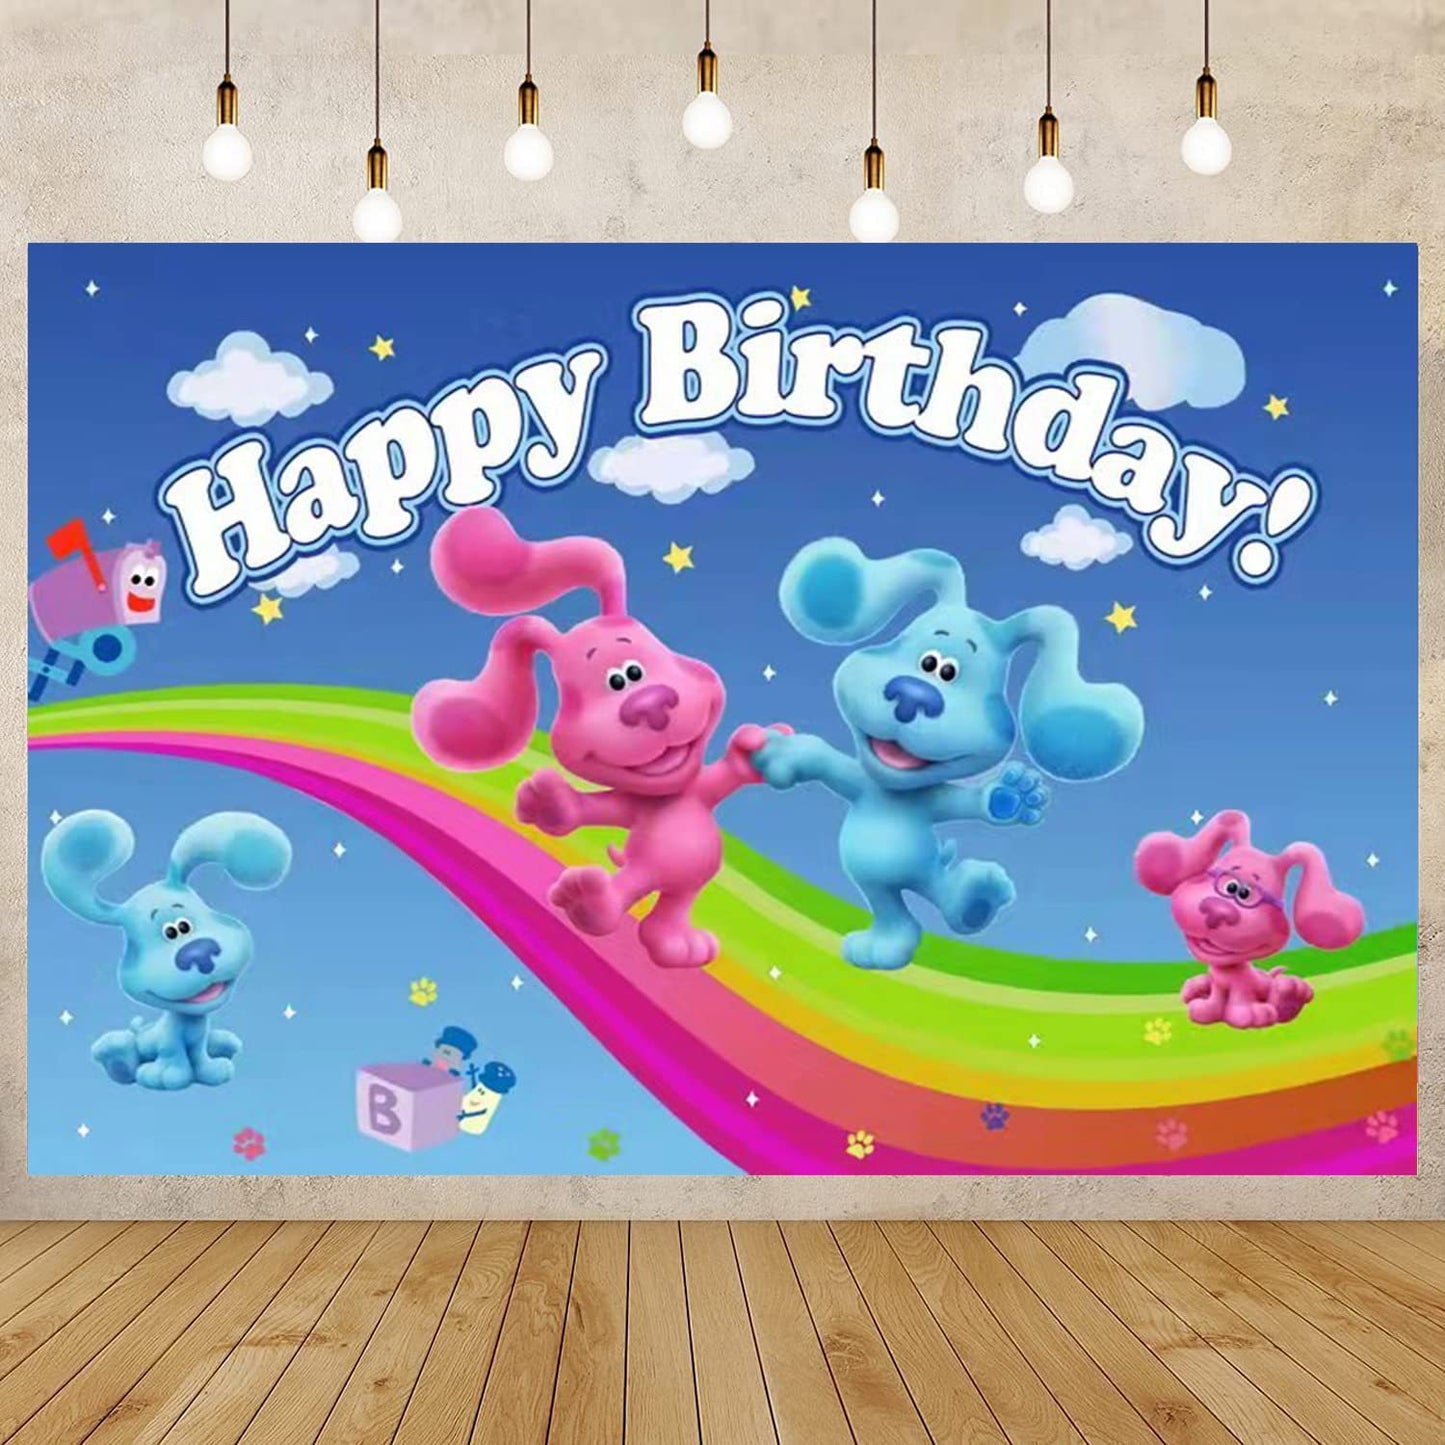 Blue Clues Birthday Party Decorations.